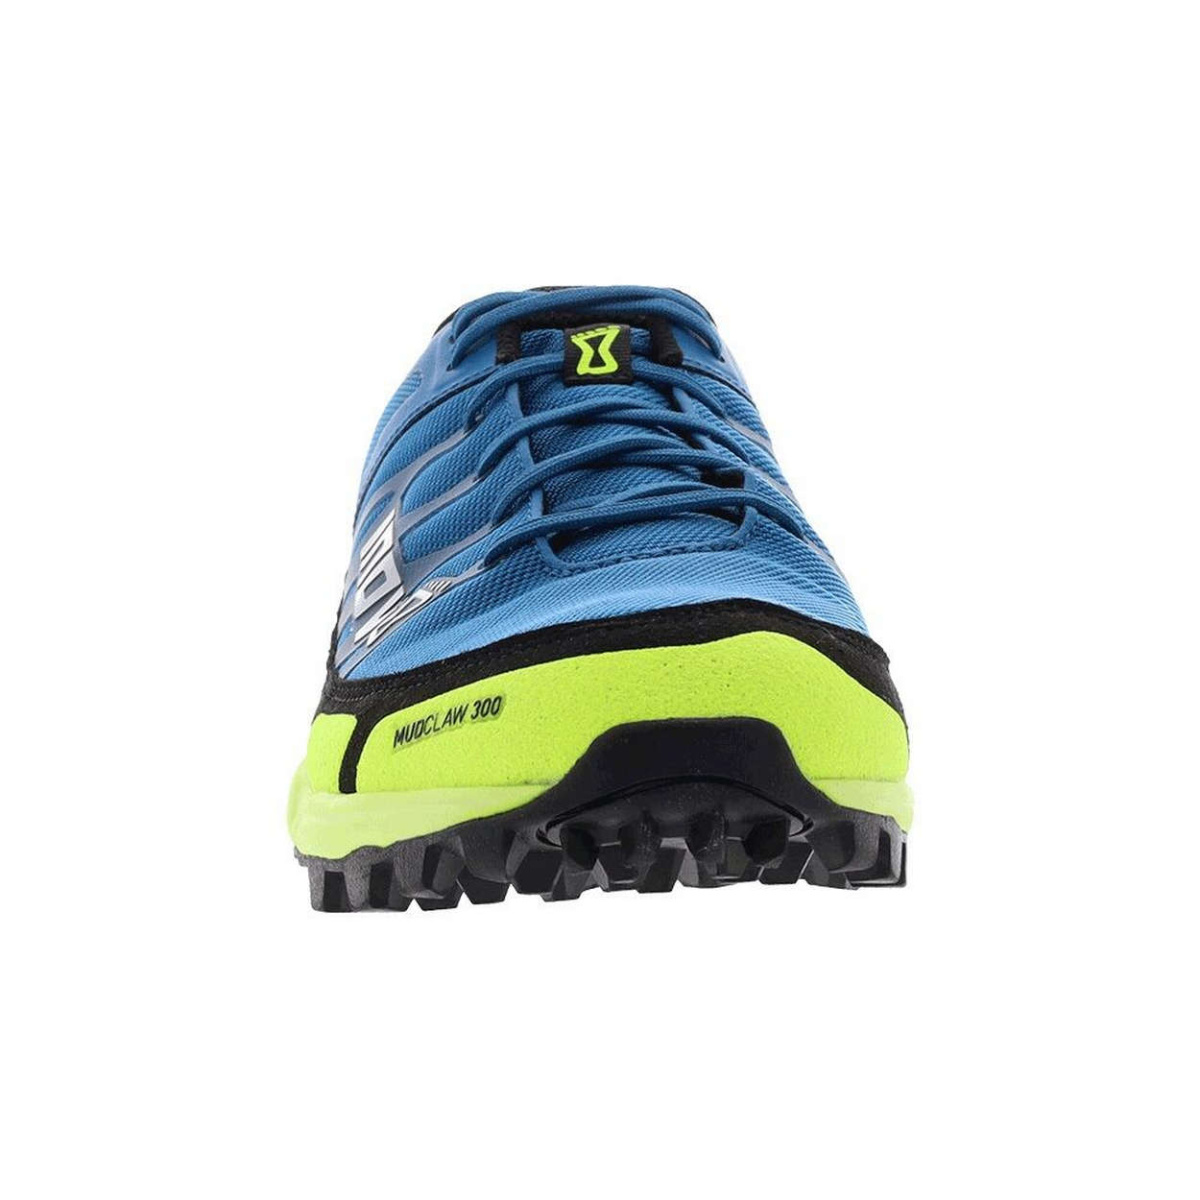 inov 8 mens Mudclaw 300 trail running shoe Fast and Light CH 006